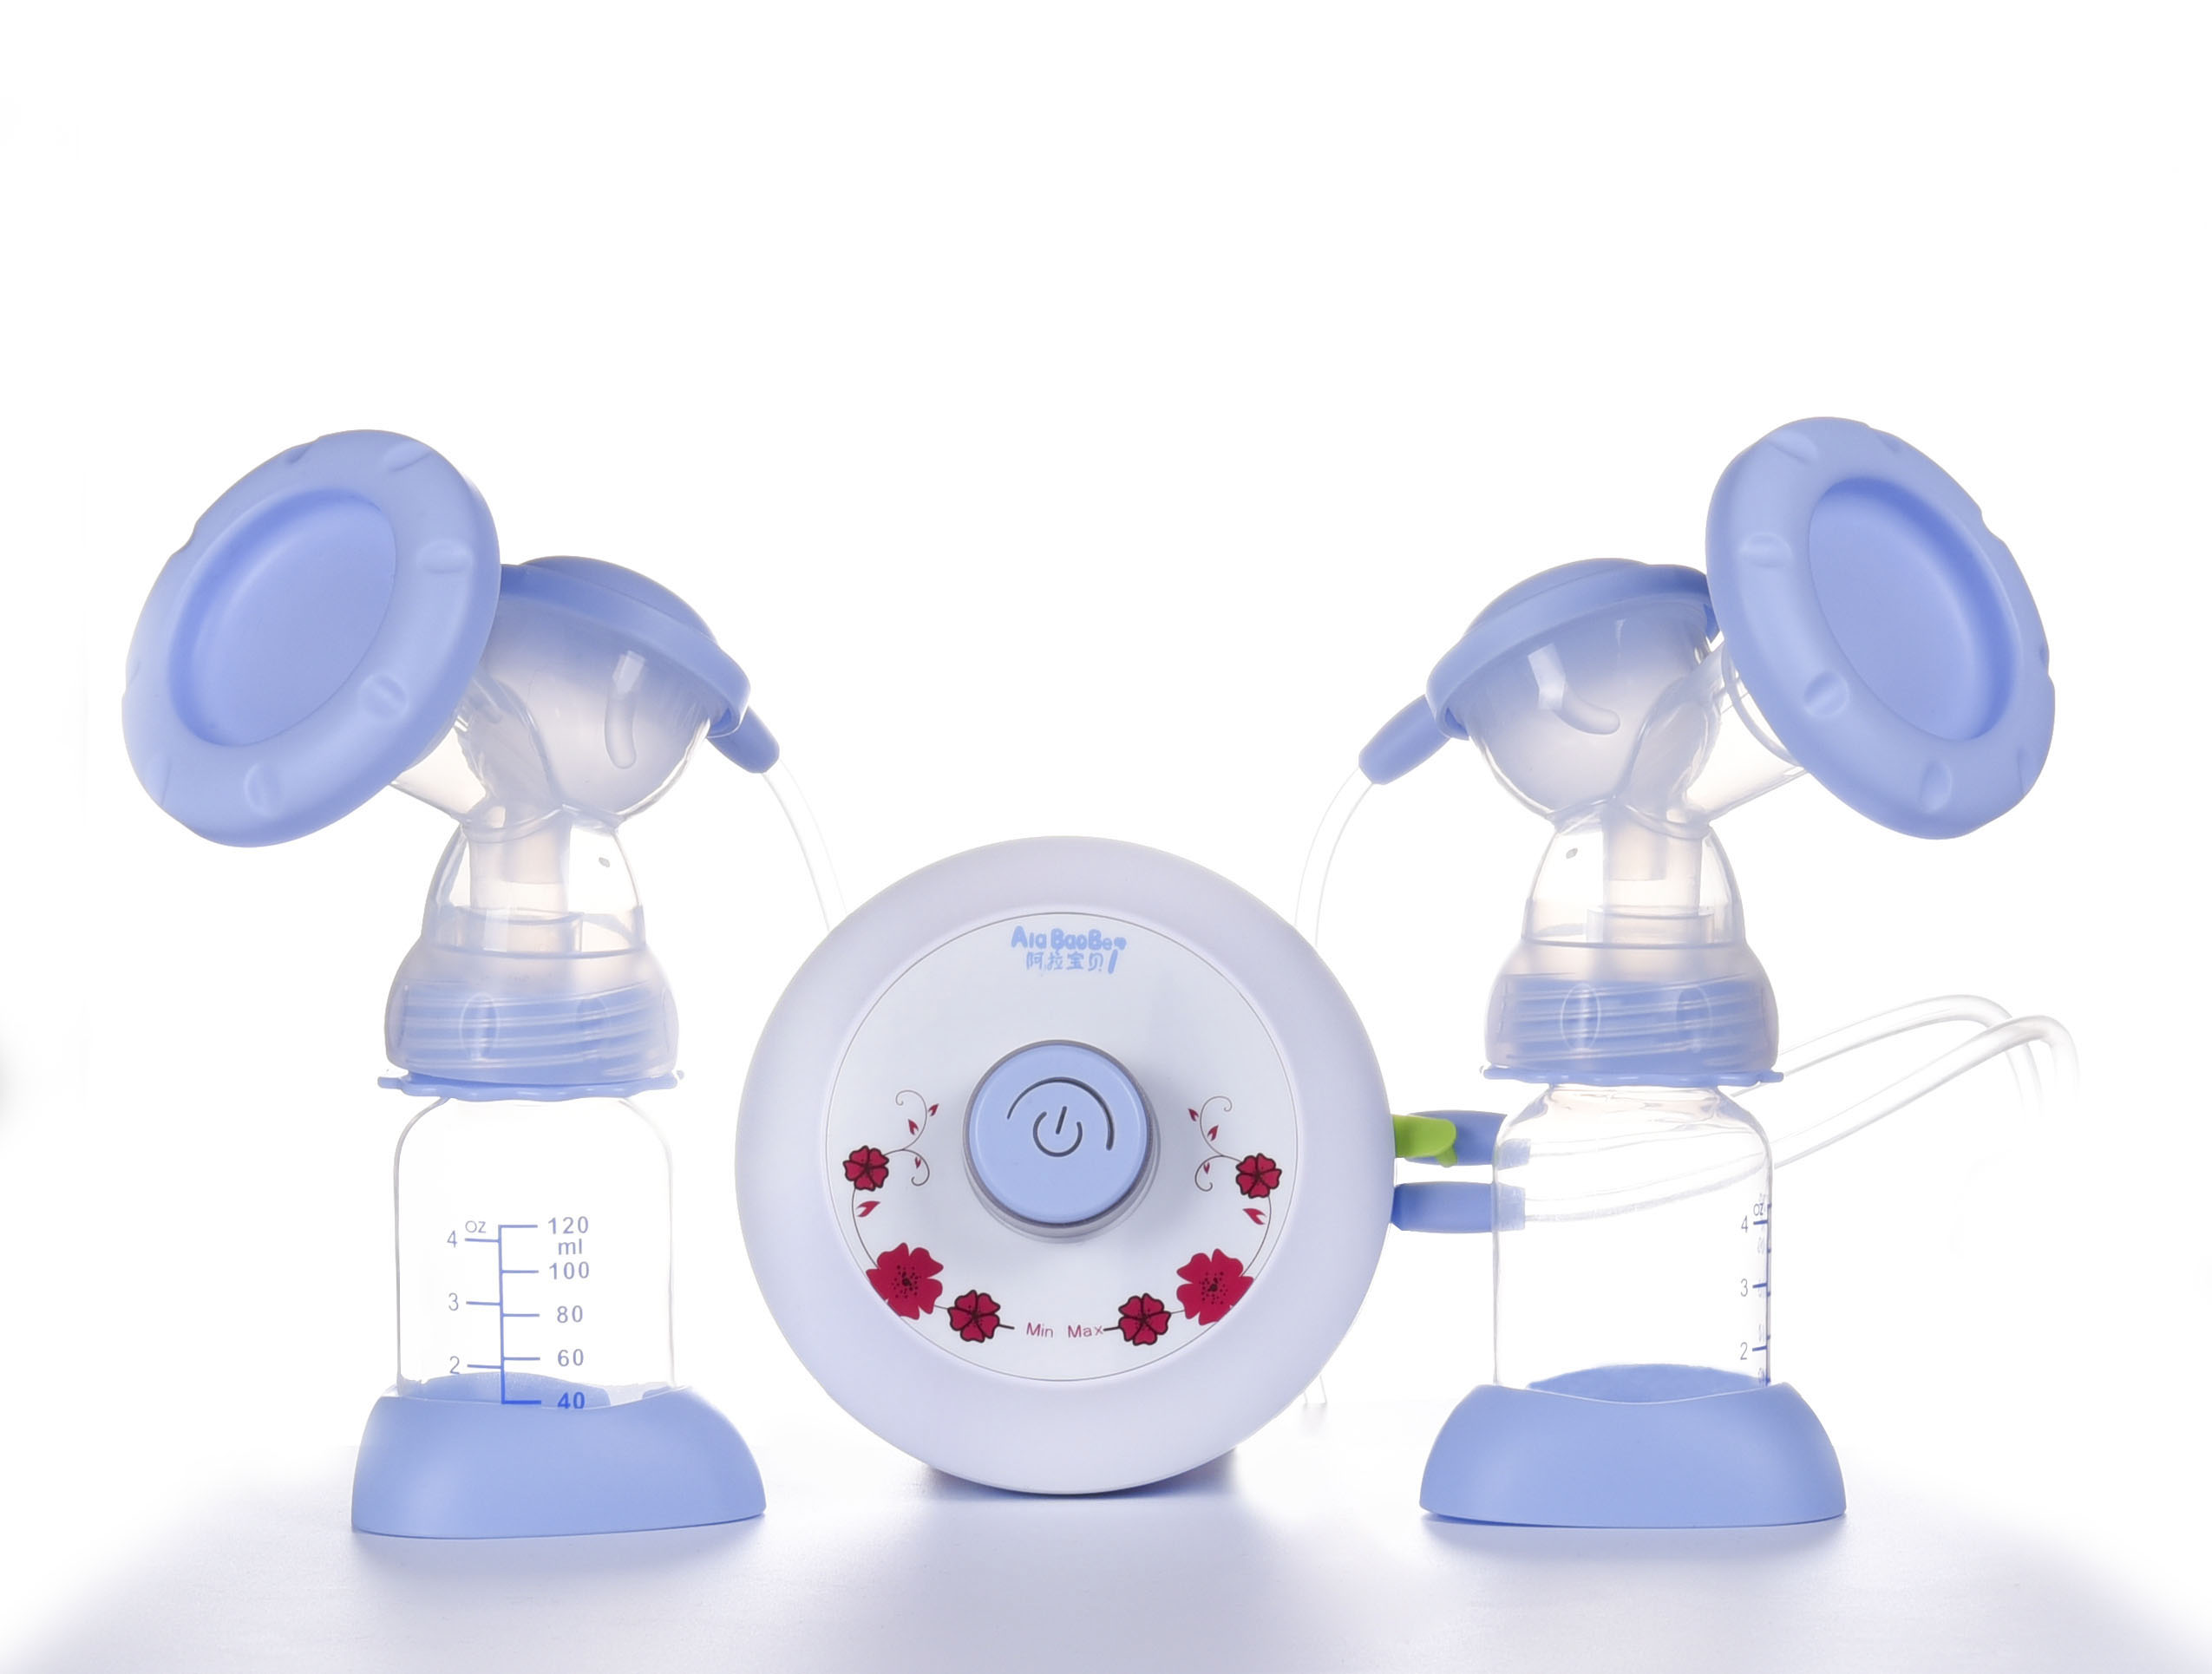 Double Phases Breast Pump/ Electric Breast Pump/ Pump Breast/ Breast Suction Pump/ Breast Pump Enlarge with Twin Cup